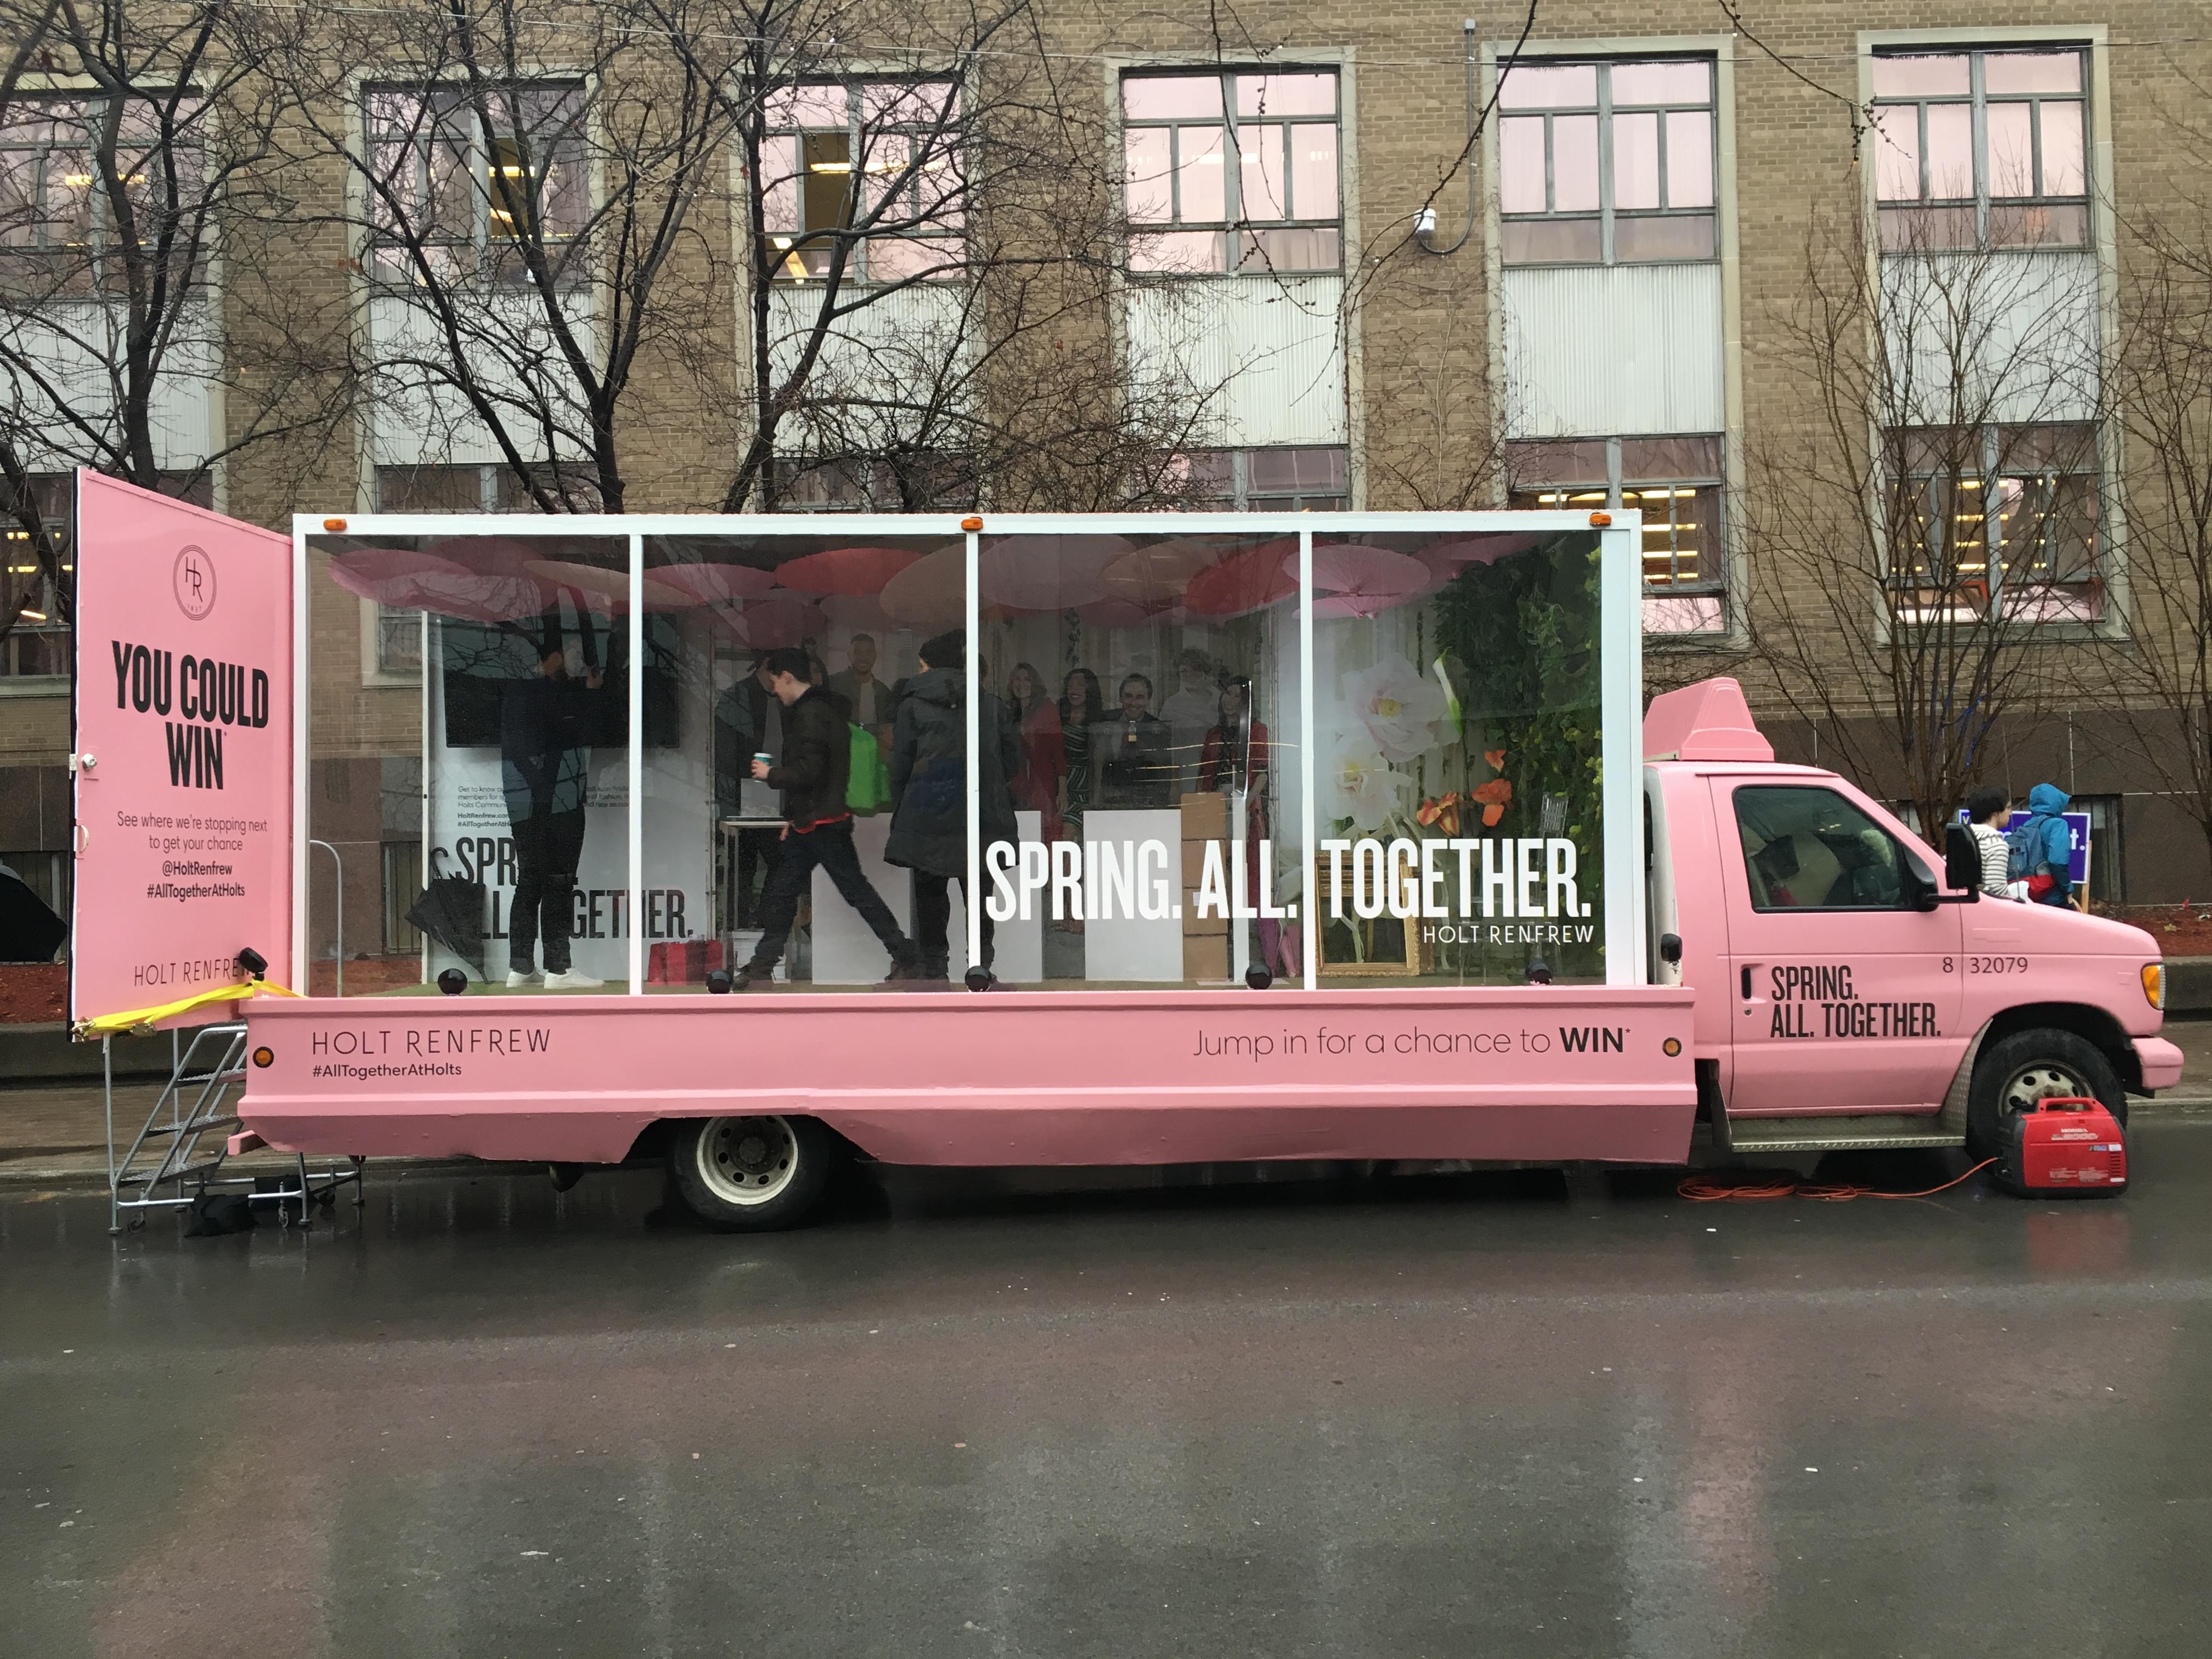 A guerilla mobile billboard communicates with consumers in an interactive fashion